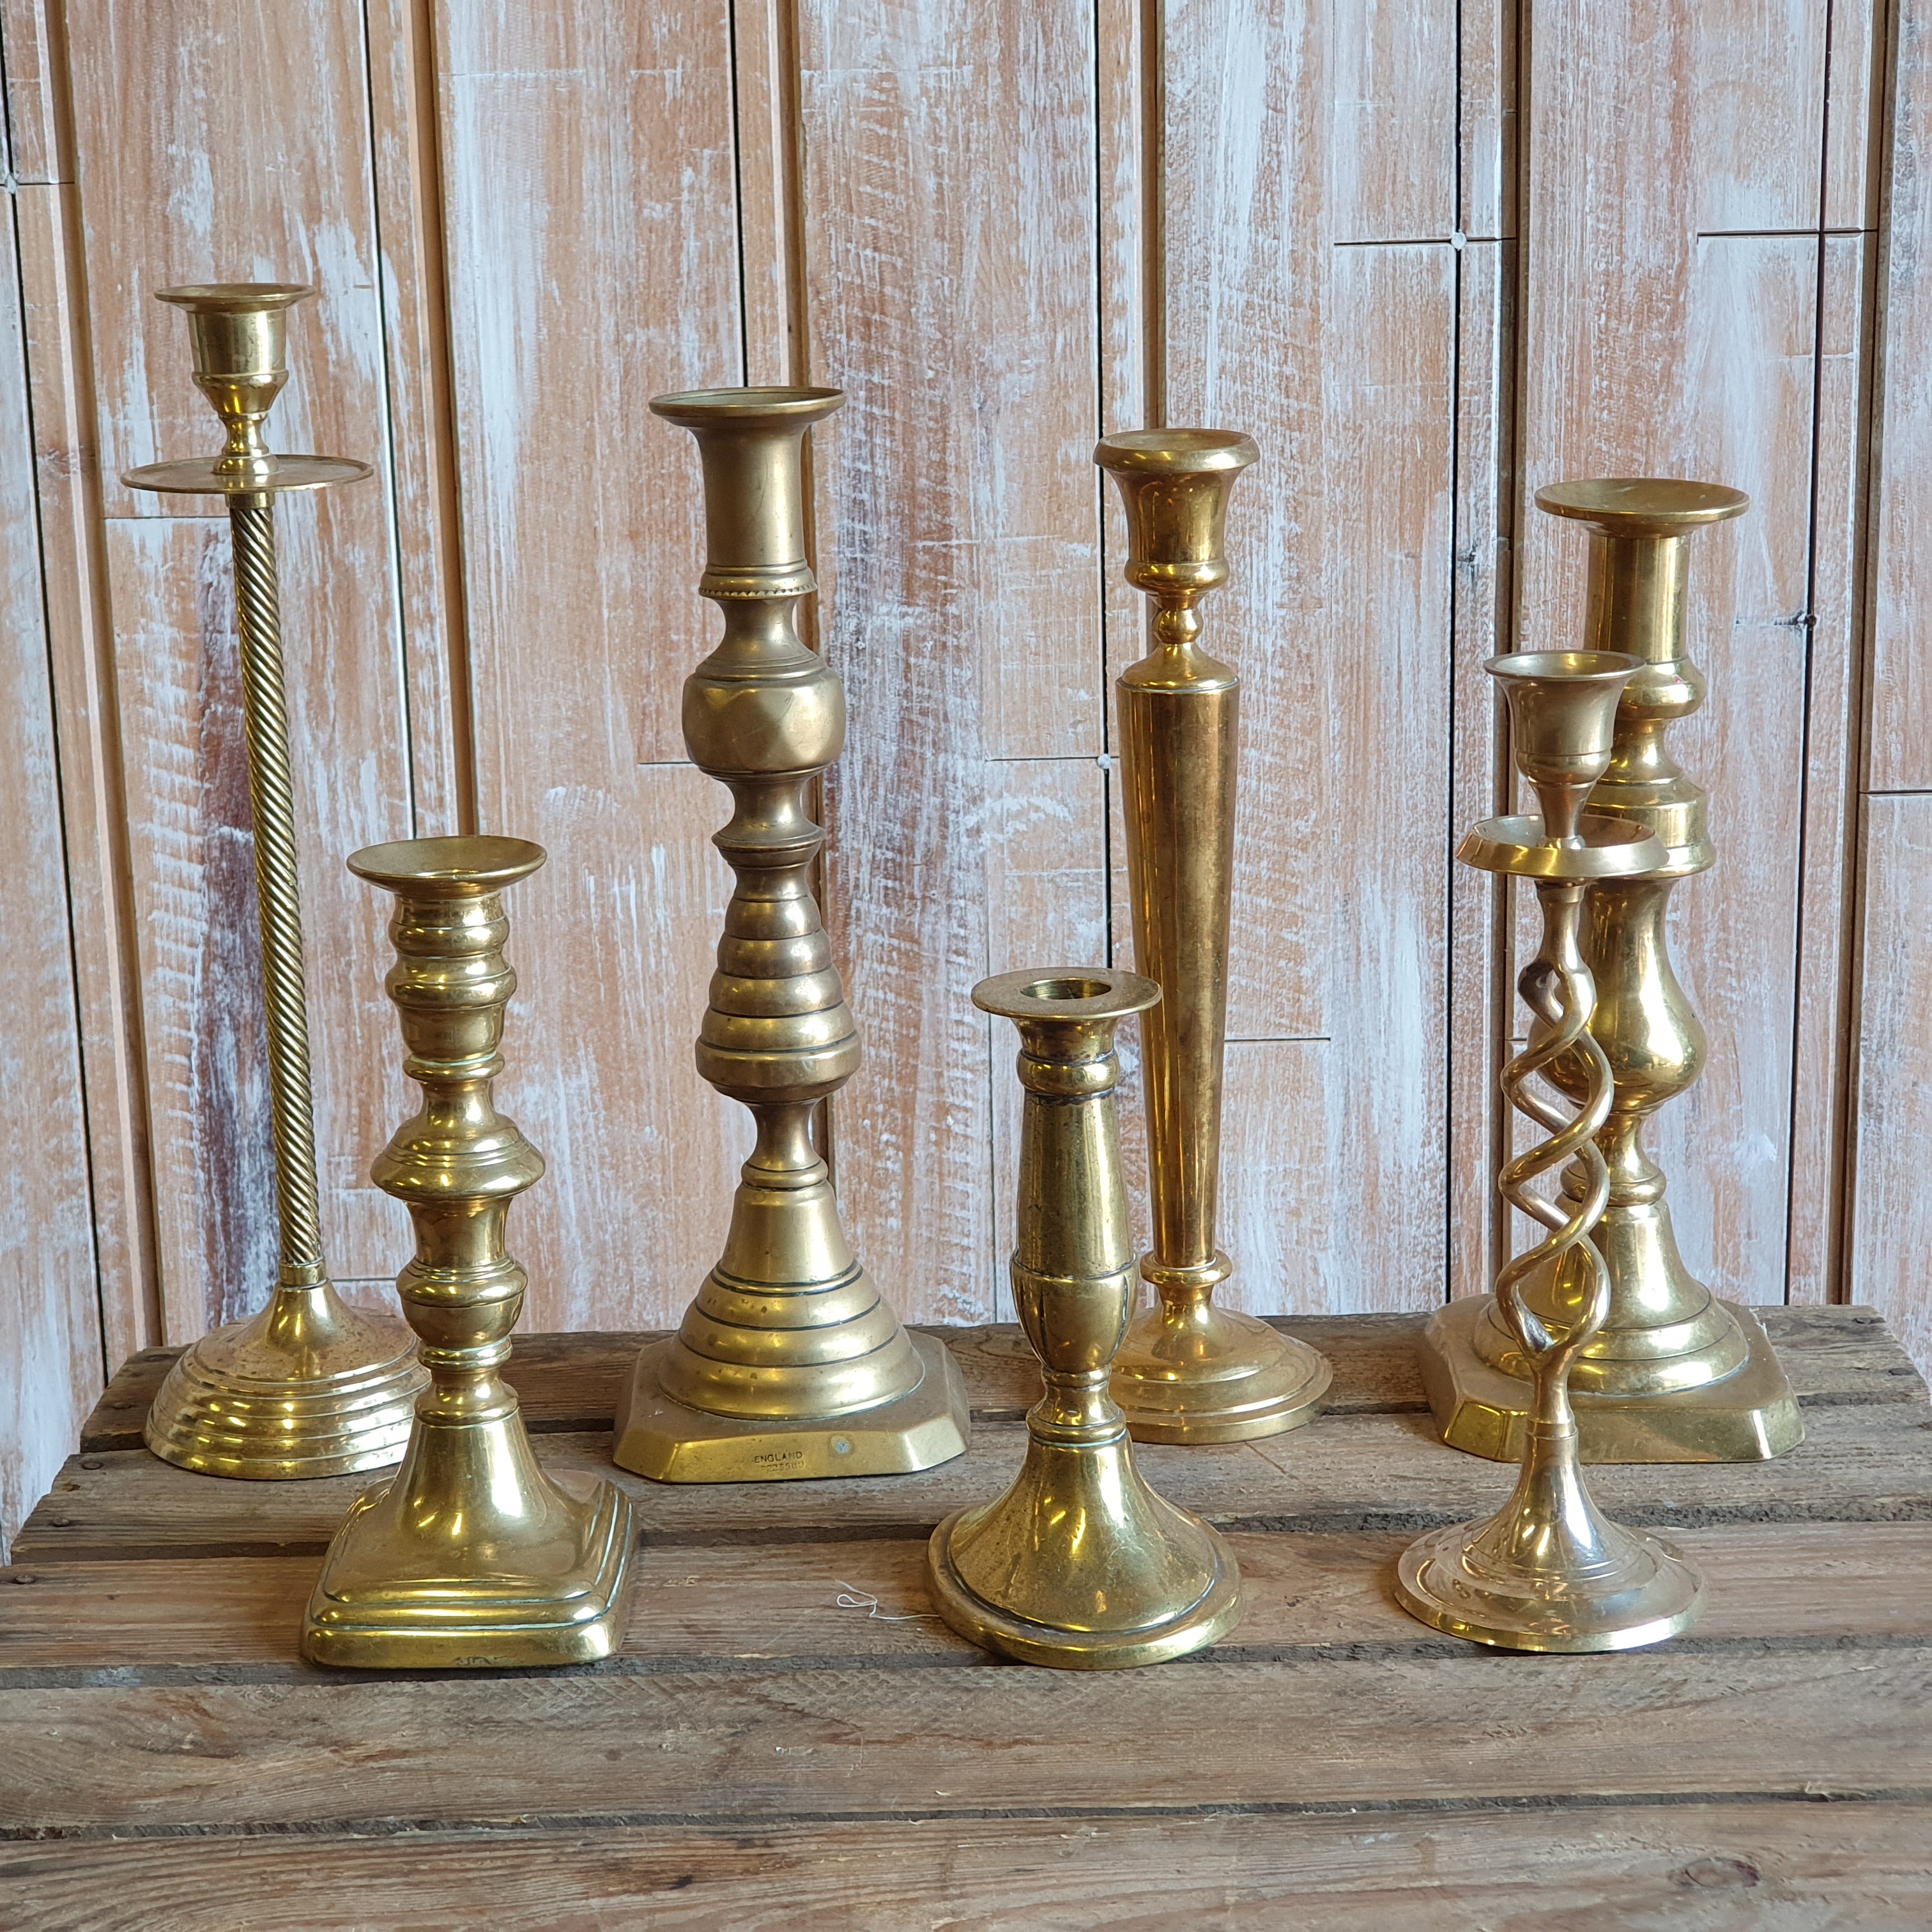 Antique Brass Candle Holder 3 Candles, Large Brass Candlestick